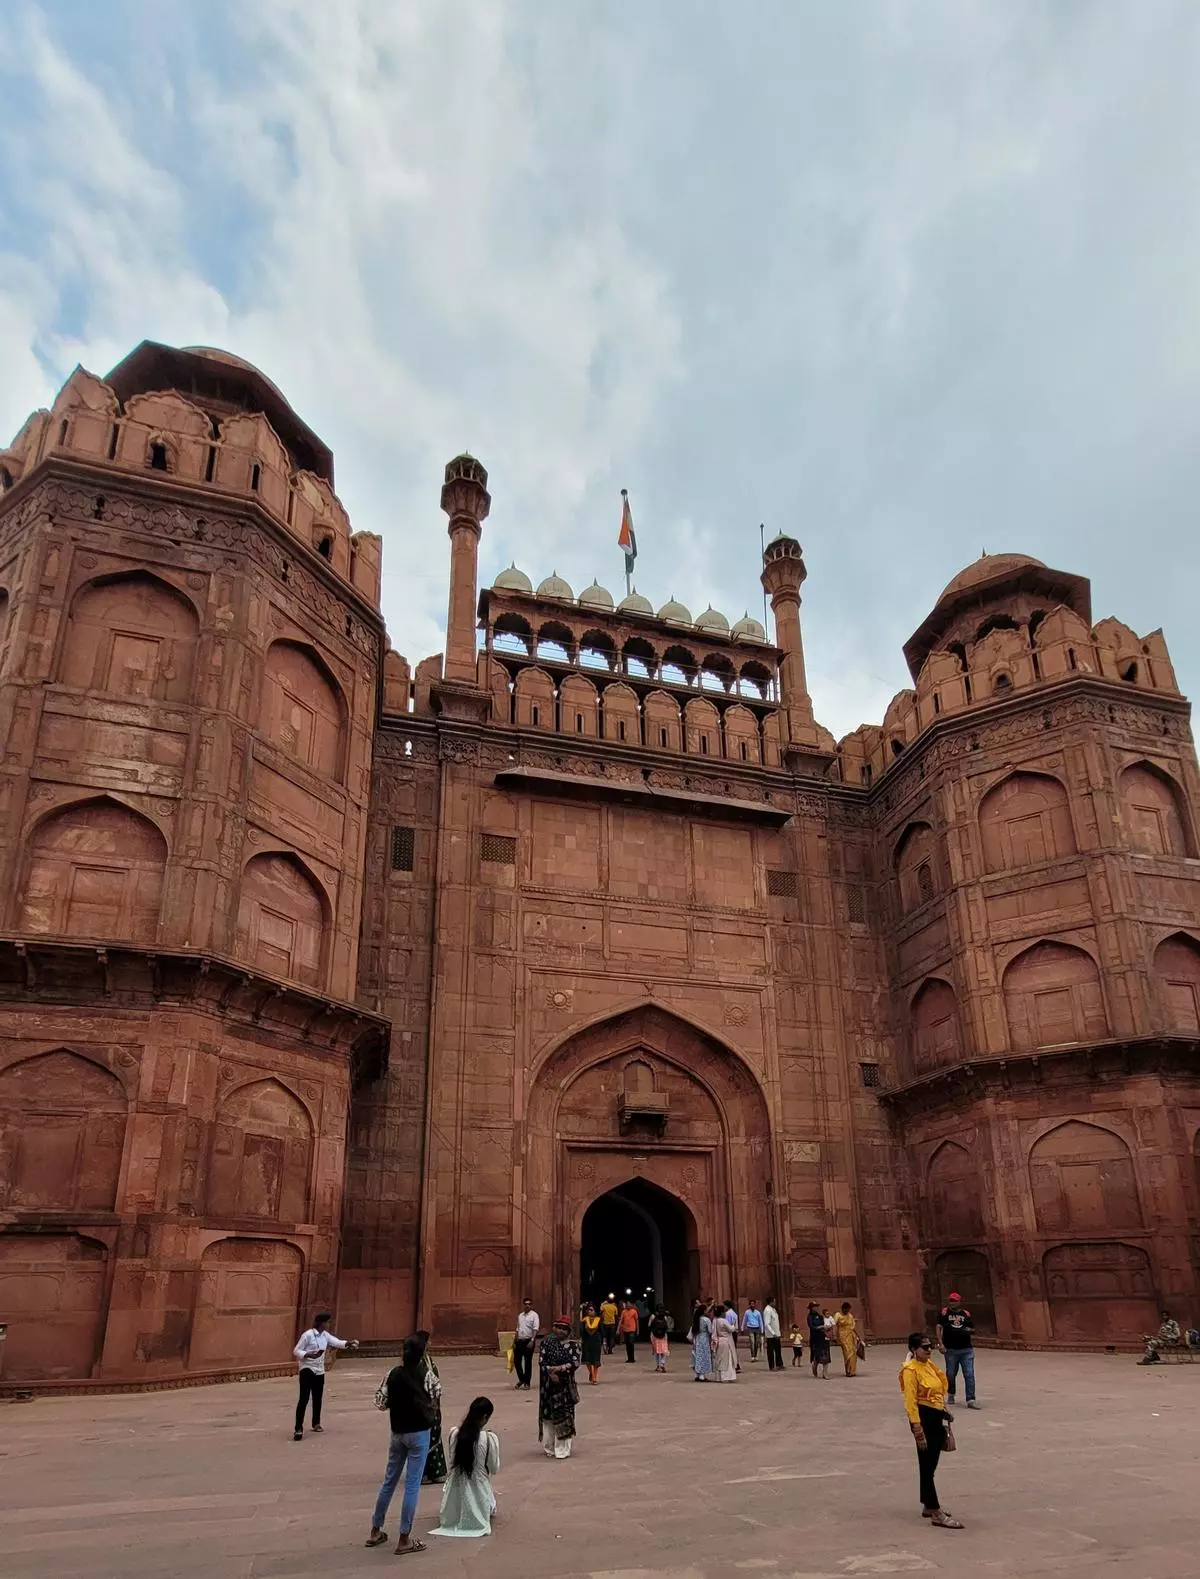 Go to Red Fort and relive the Mughal era through augmented reality ...